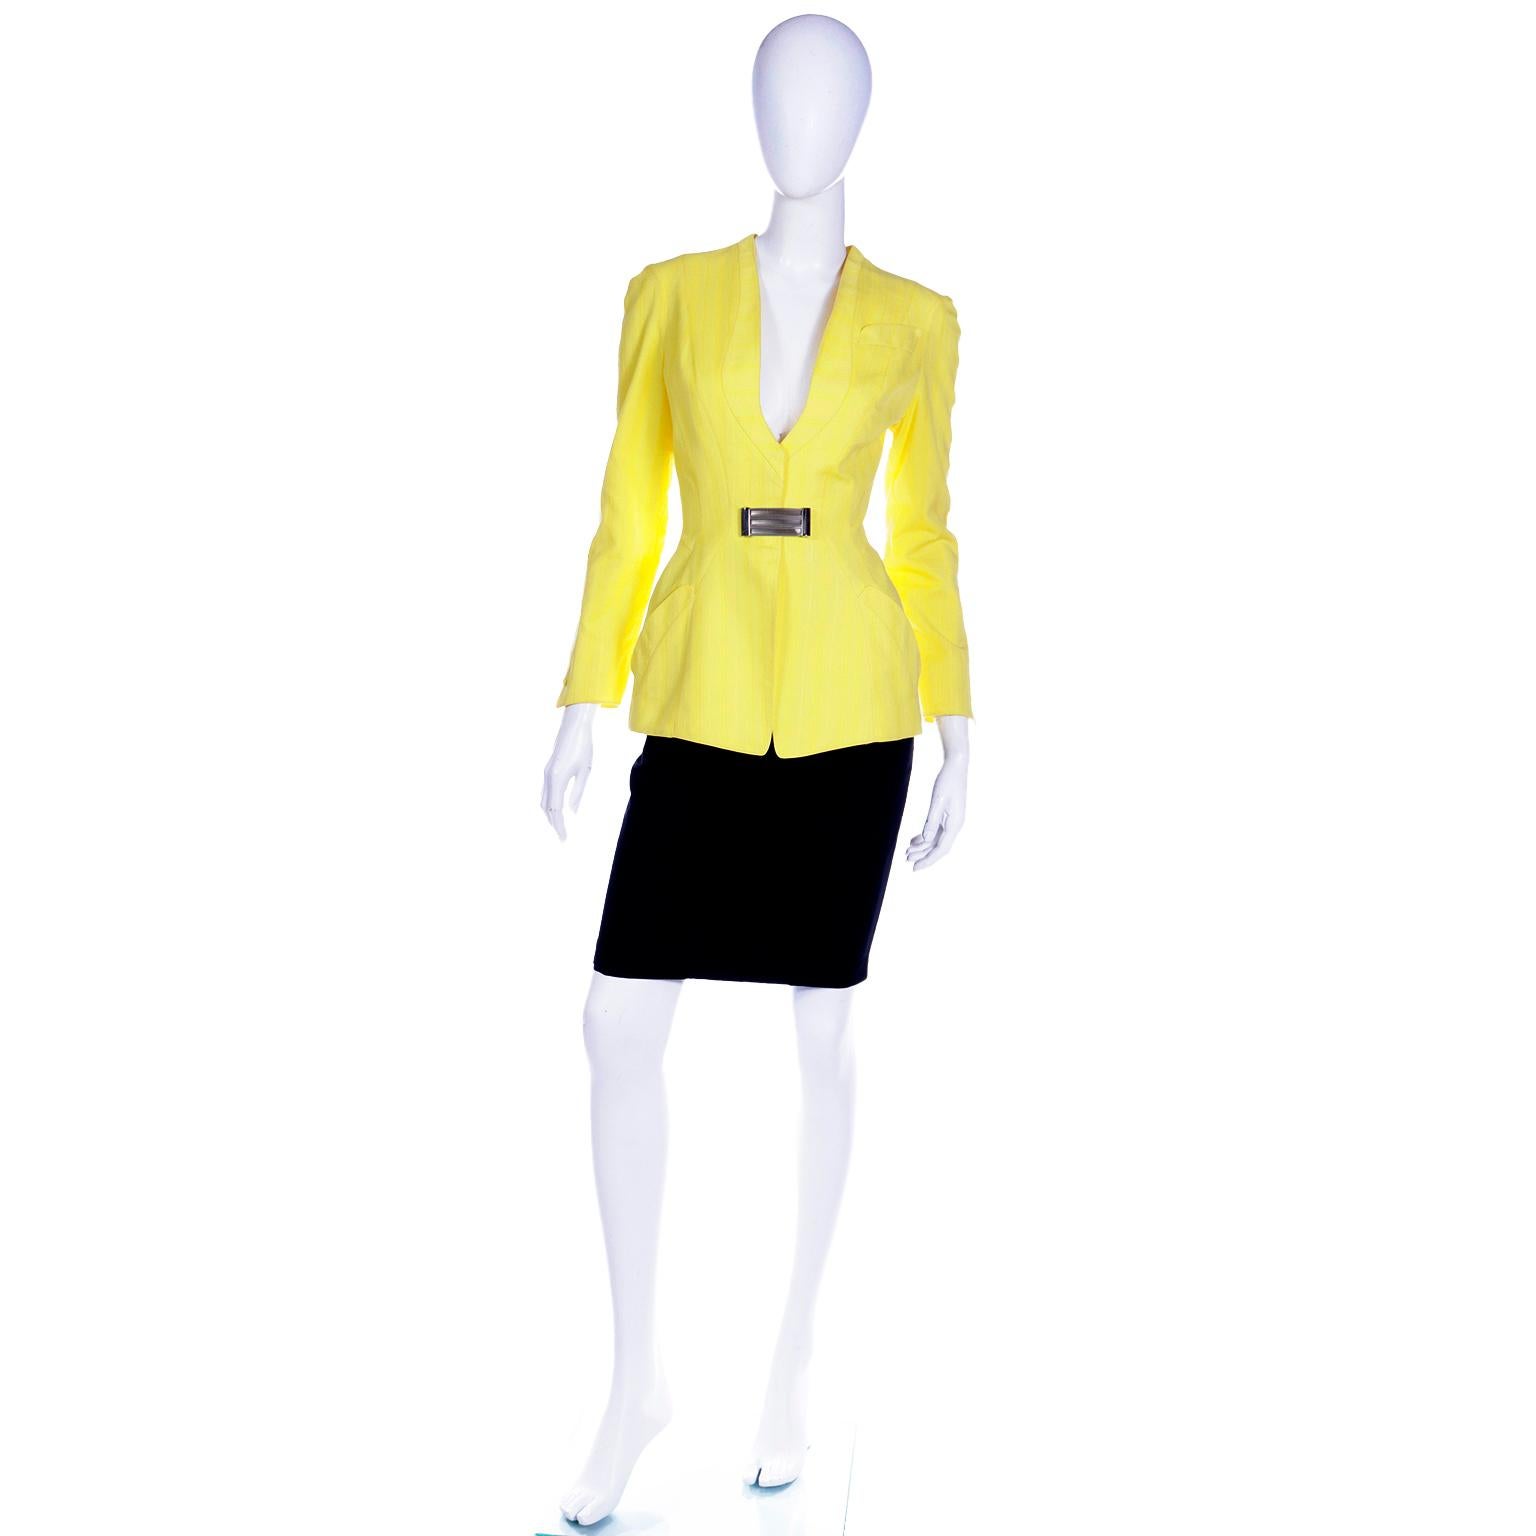 We love vintage Thierry Mugler and this show stopping 2 piece skirt suit is so stunning! The ensemble includes a slim tonal striped black cotton pencil skirt and a contrasting tonal striped yellow cotton jacket with a plunging neckline. The skirt